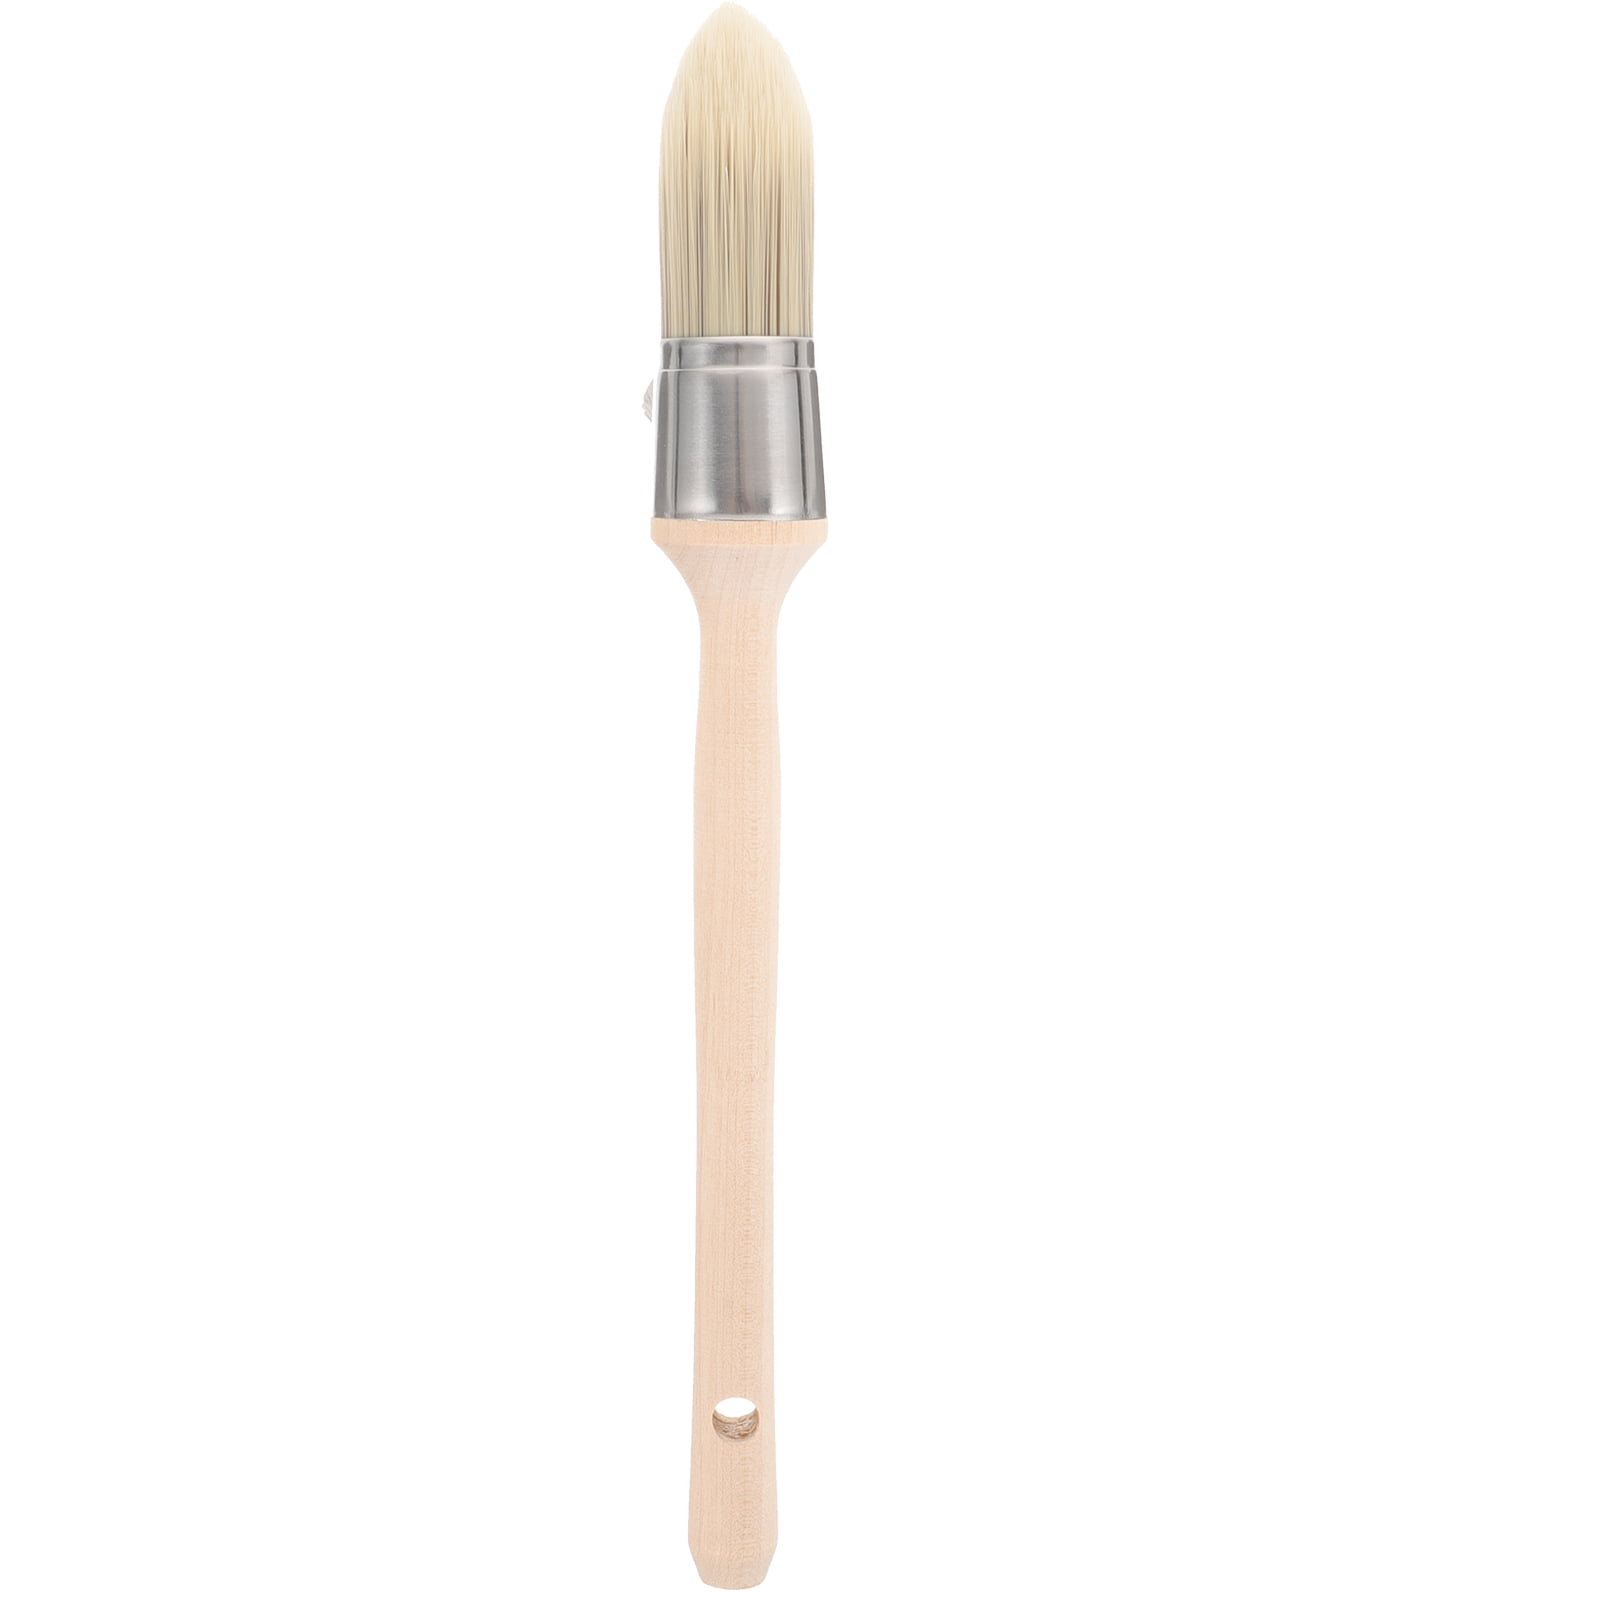 Lounsweer 4 Pieces Small Paint Brush Edge Painting Tool with Wooden Handle  Round Paint Brushes Trim